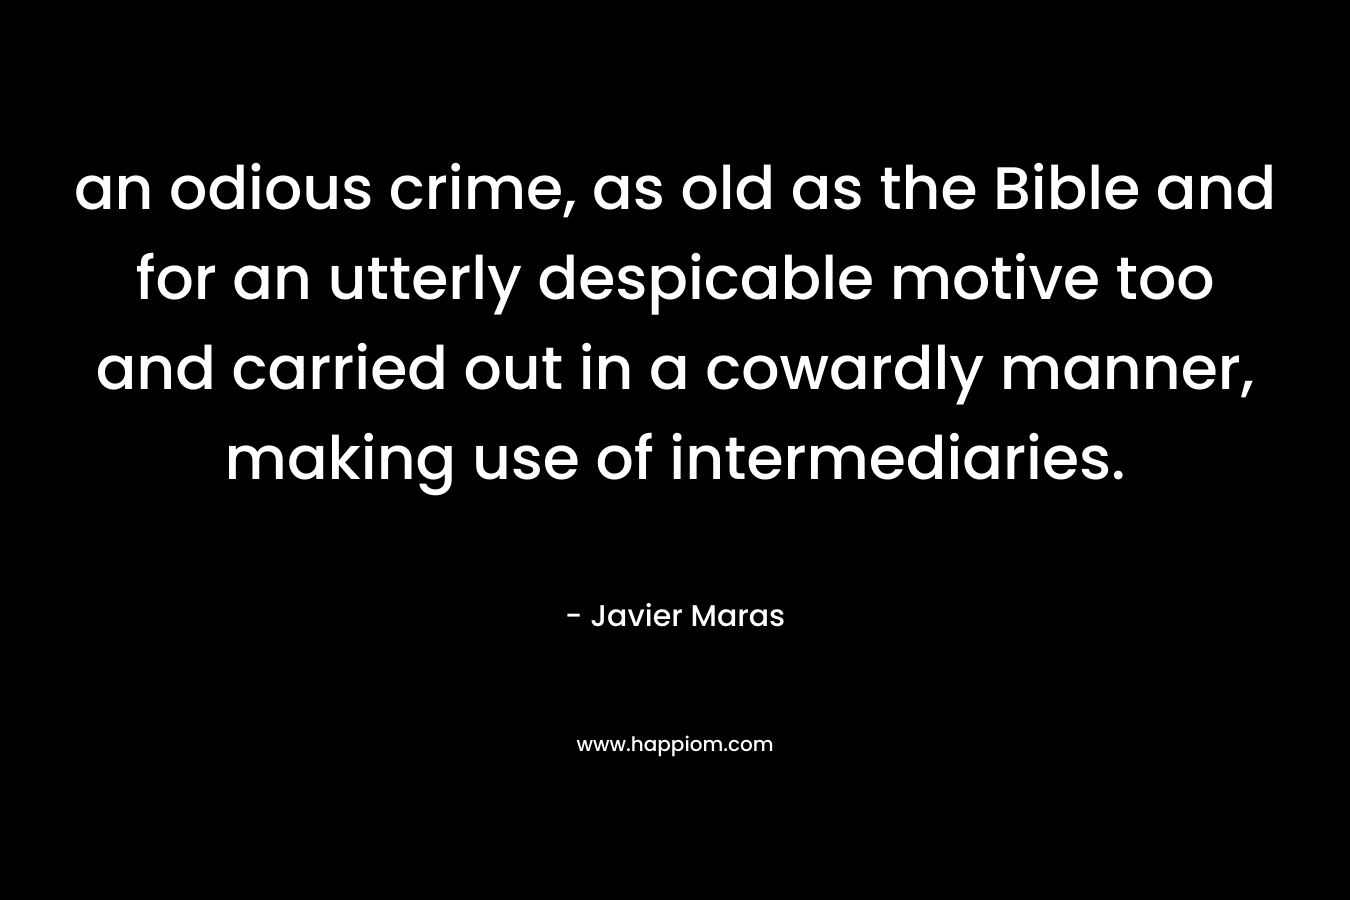 an odious crime, as old as the Bible and for an utterly despicable motive too and carried out in a cowardly manner, making use of intermediaries. – Javier Maras